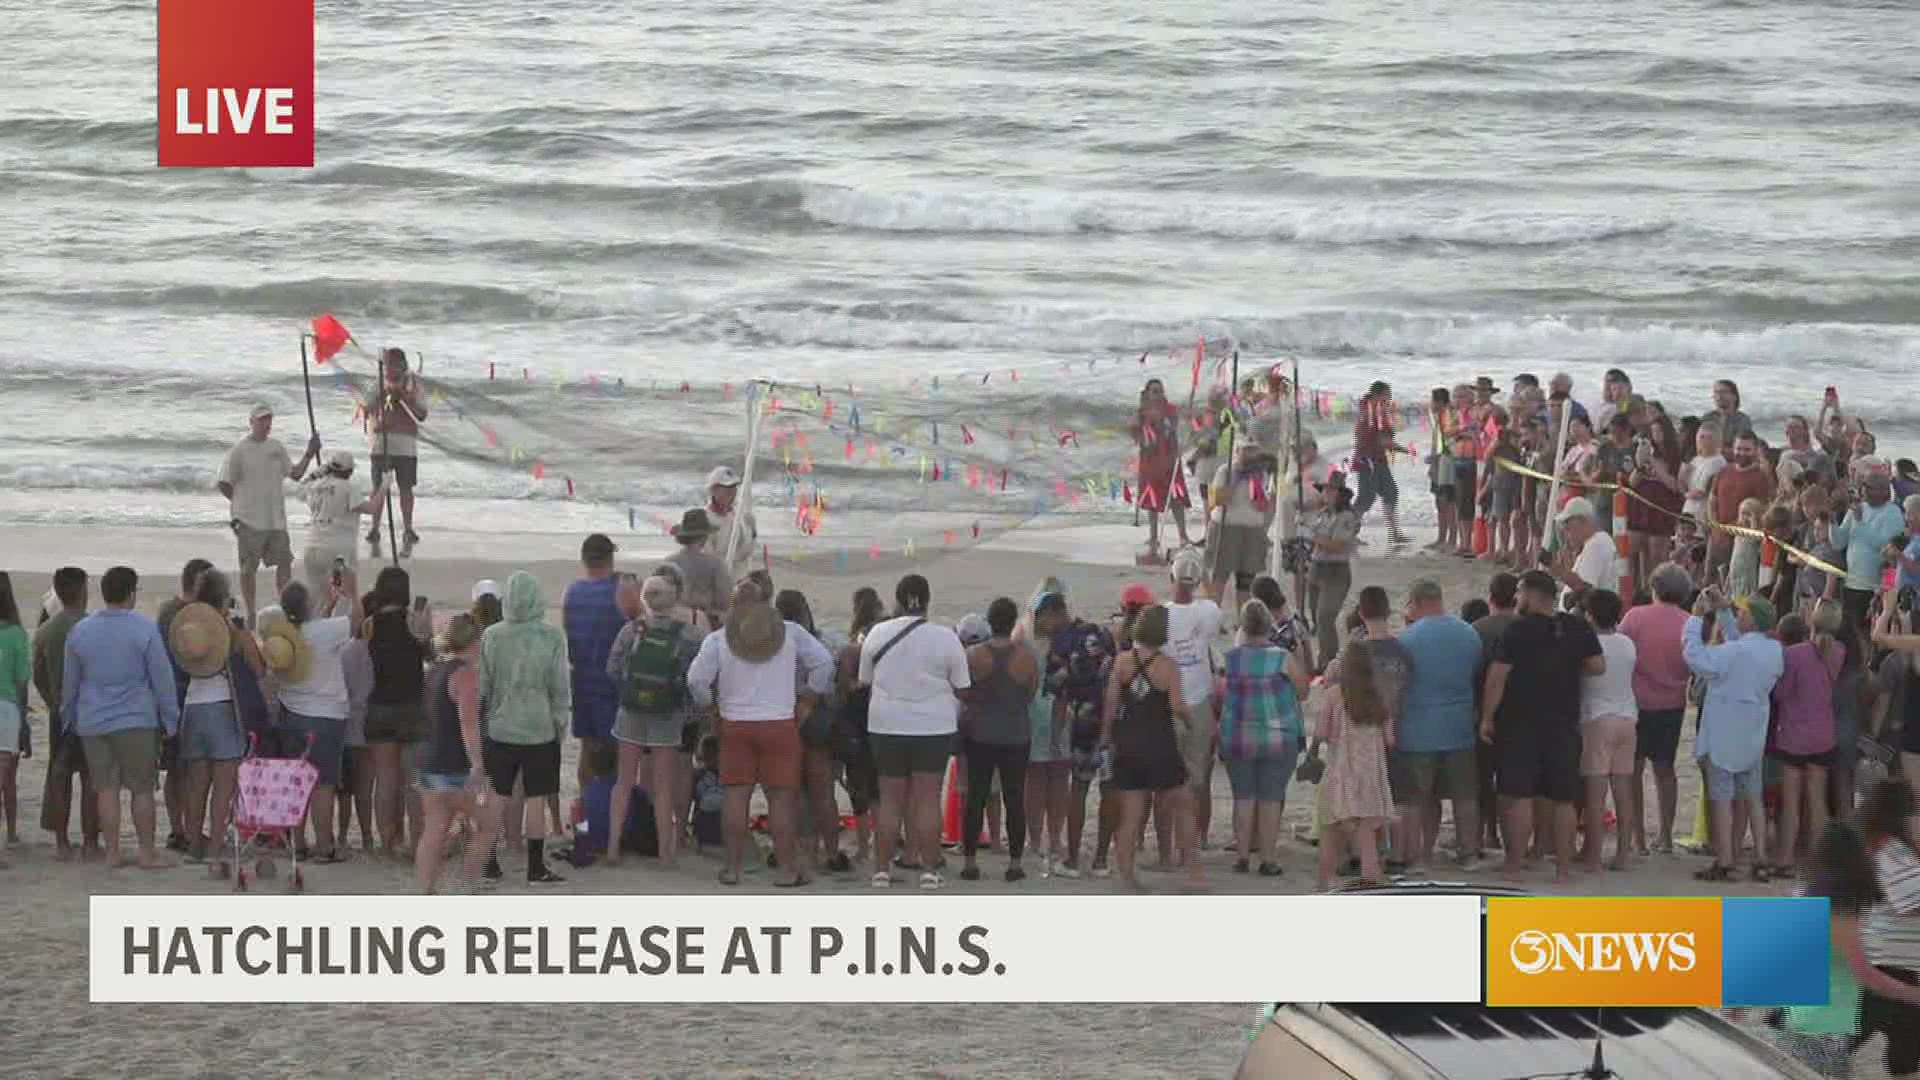 We captured the crowds showing up to one of the many Kemp's Ridley sea turtle releases.